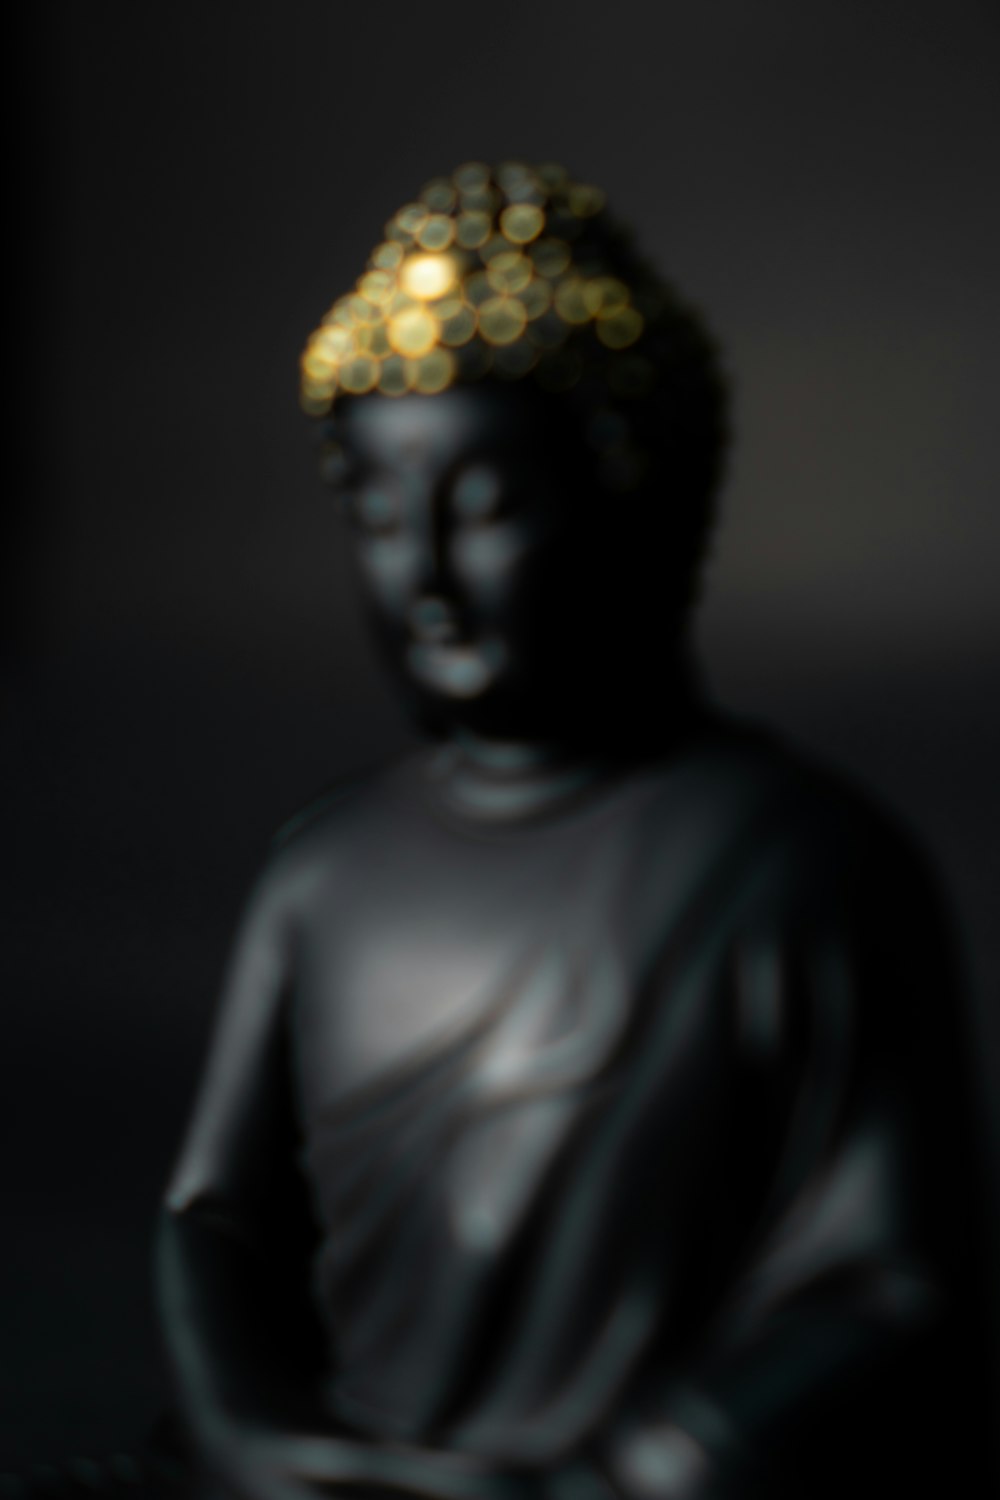 gold buddha statue in close up photography